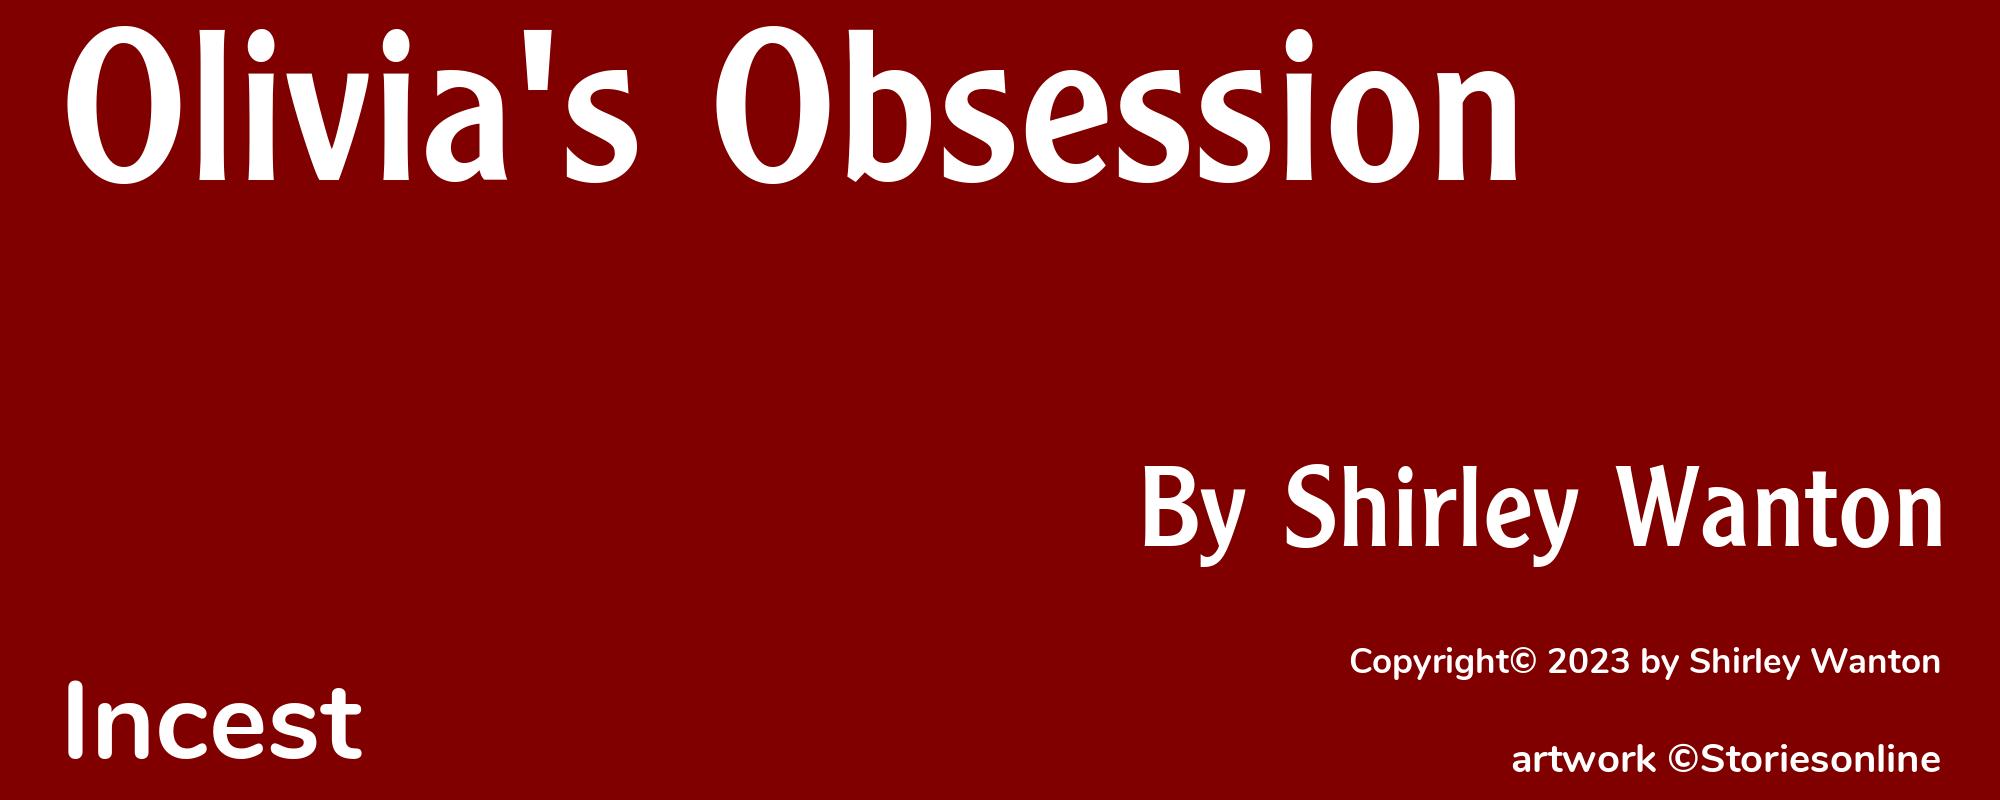 Olivia's Obsession - Cover